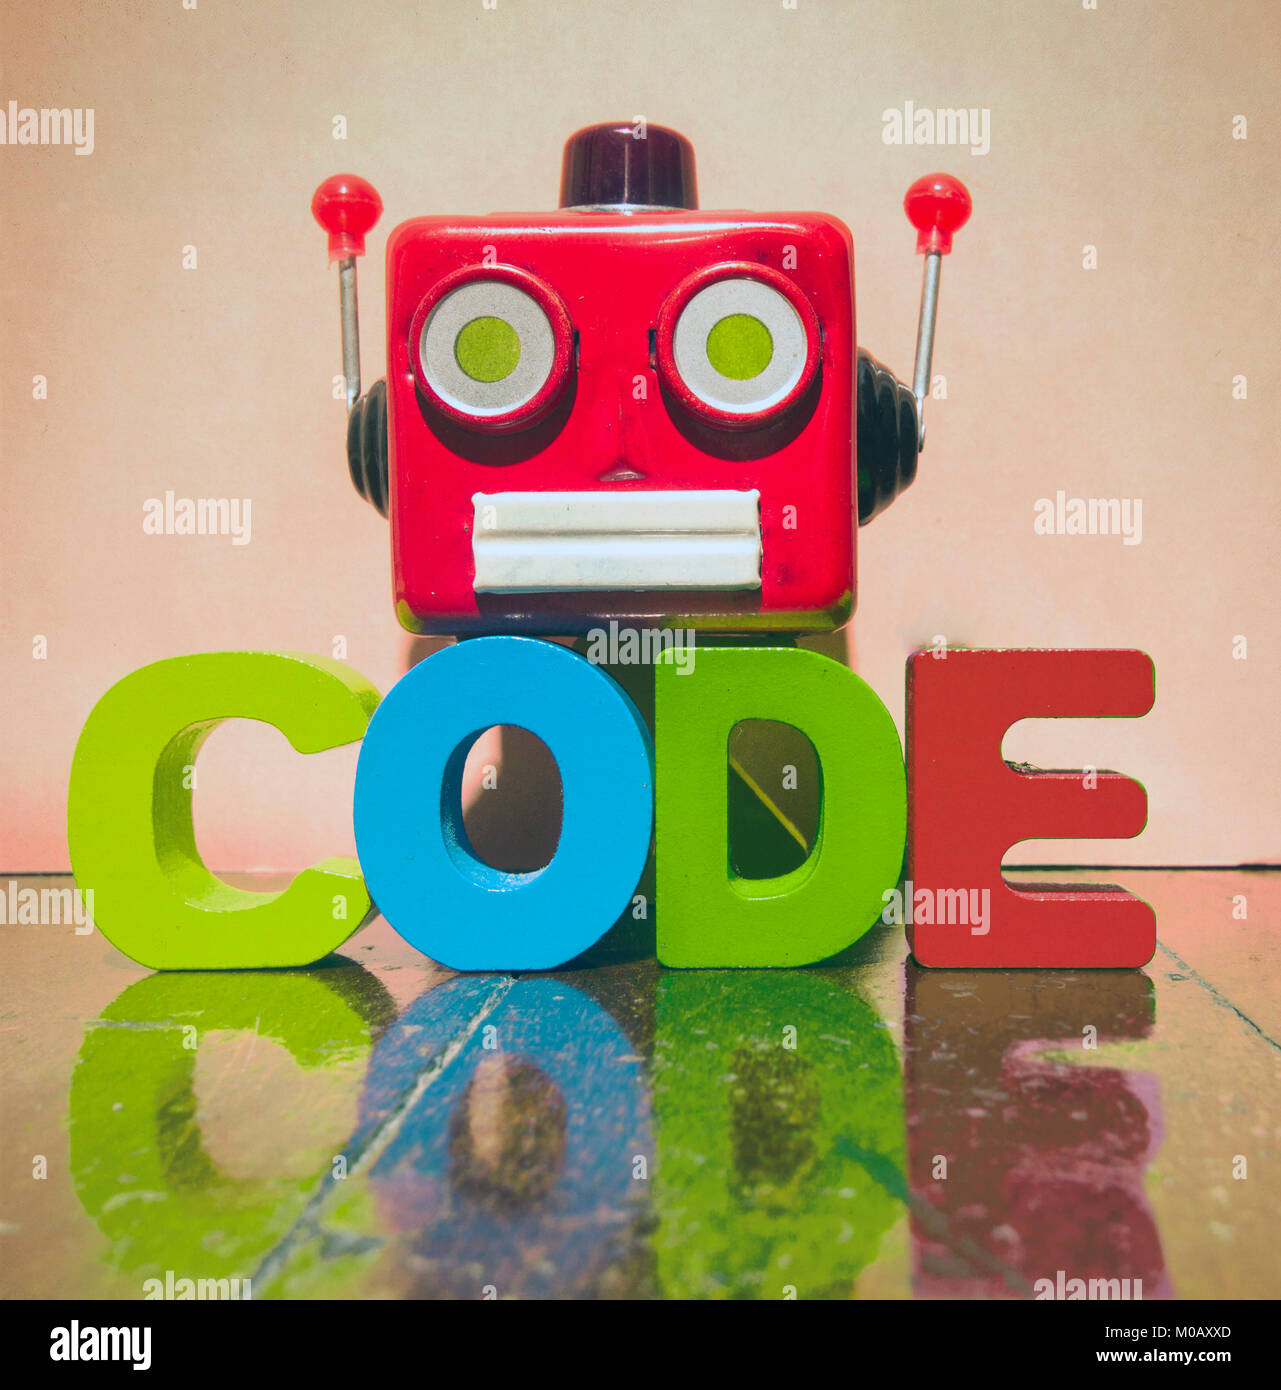 retro red robot head and the word CODE on a old wooden floor Stock Photo